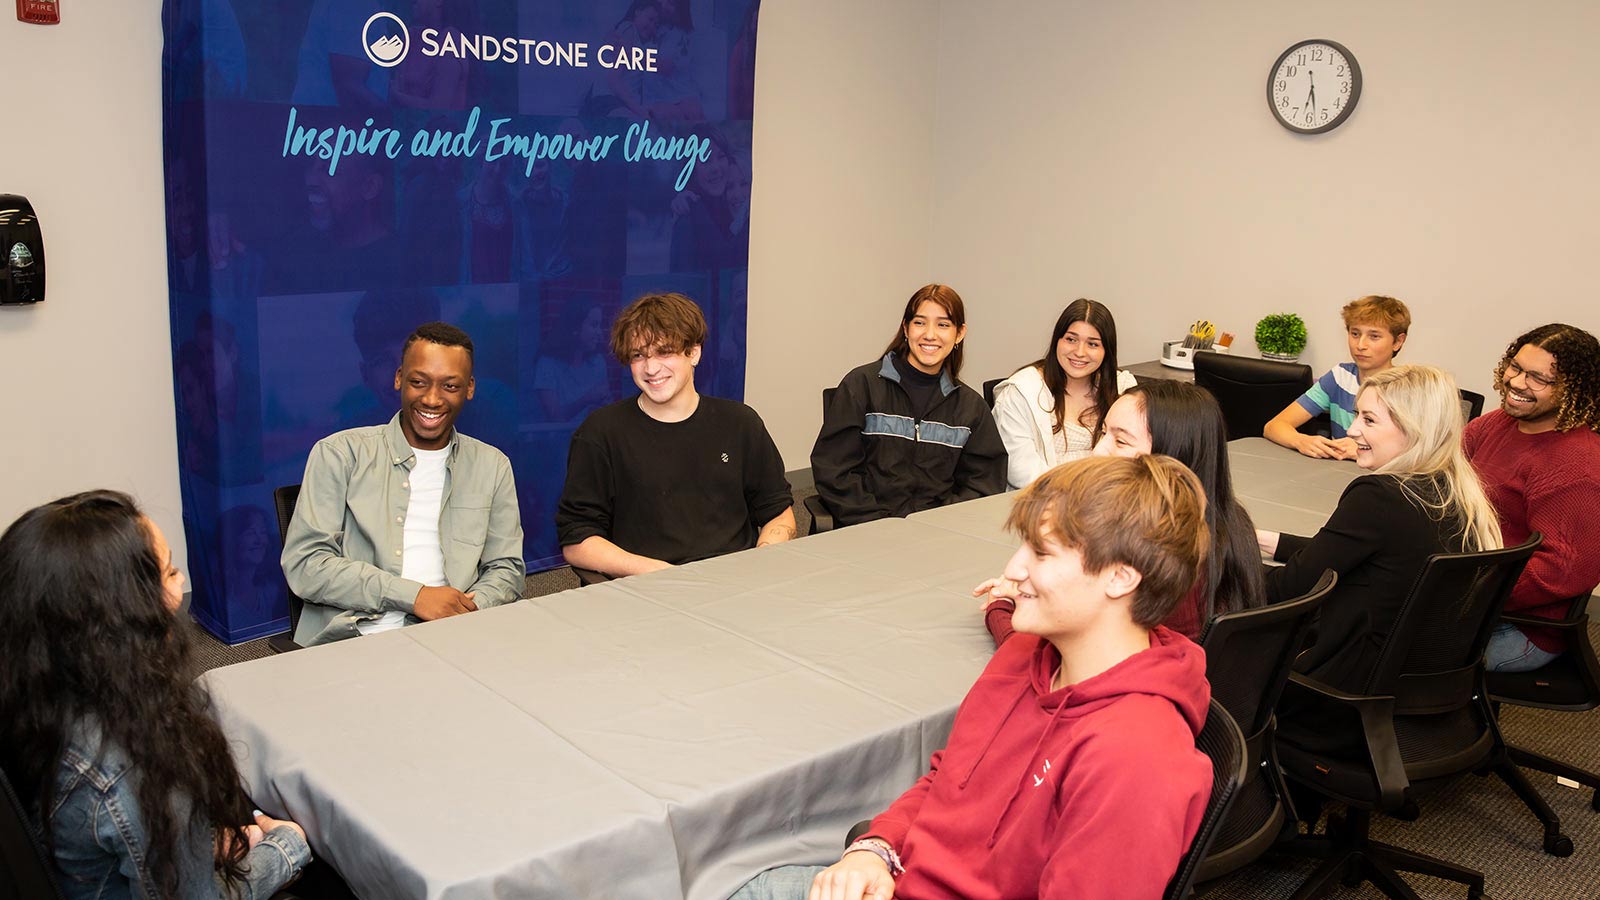 A lively group meeting with young adults and a Sandstone Care banner in the background.